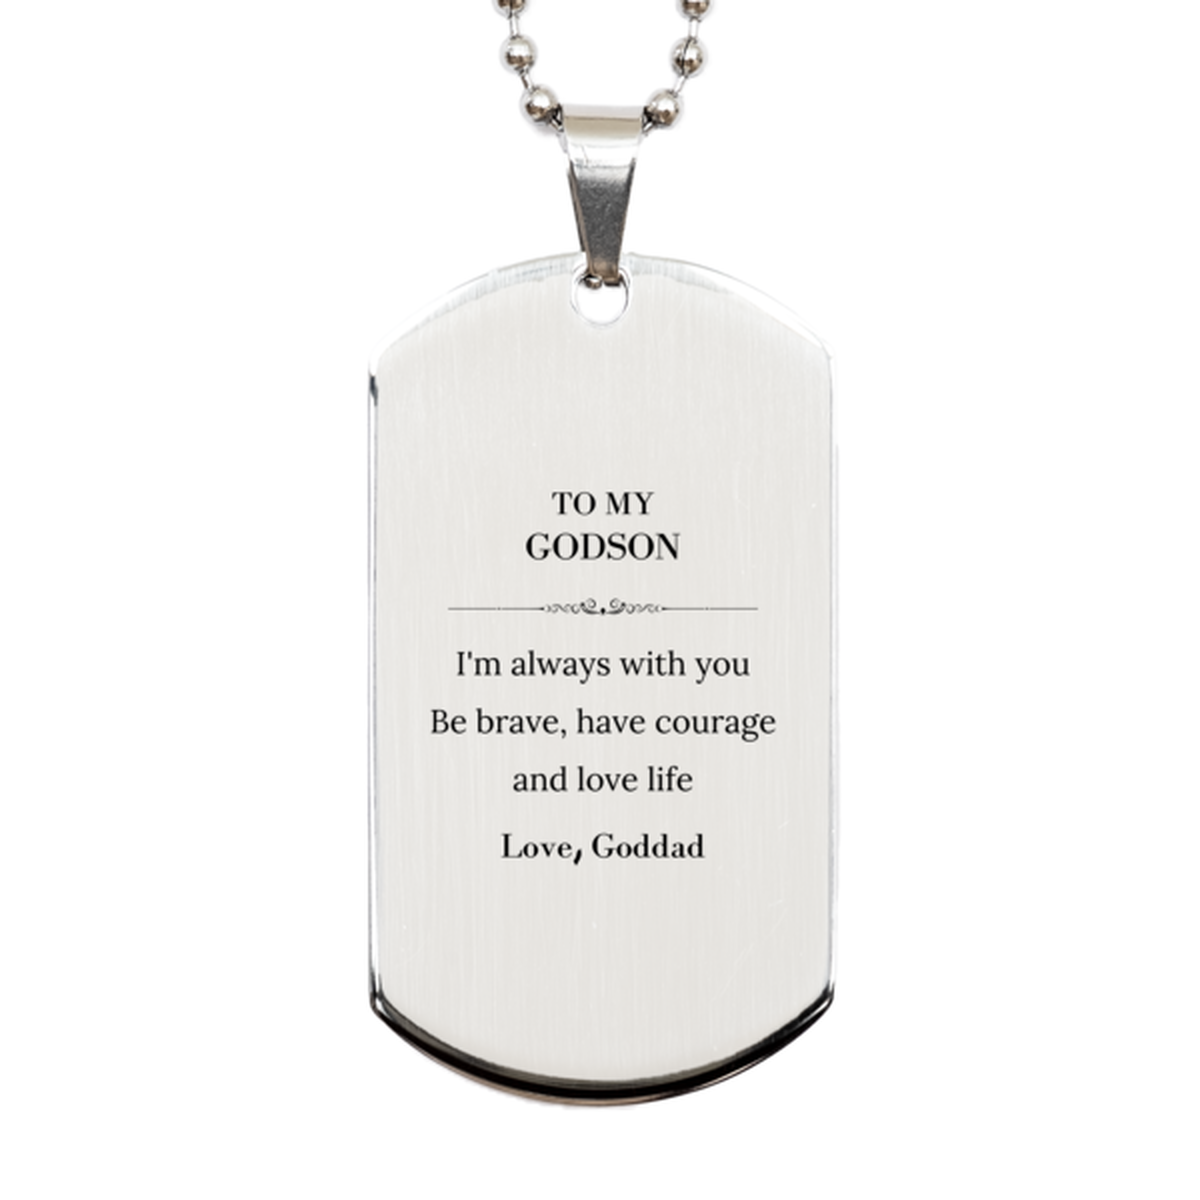 To My Godson Gifts from Goddad, Unique Silver Dog Tag Inspirational Christmas Birthday Graduation Gifts for Godson I'm always with you. Be brave, have courage and love life. Love, Goddad